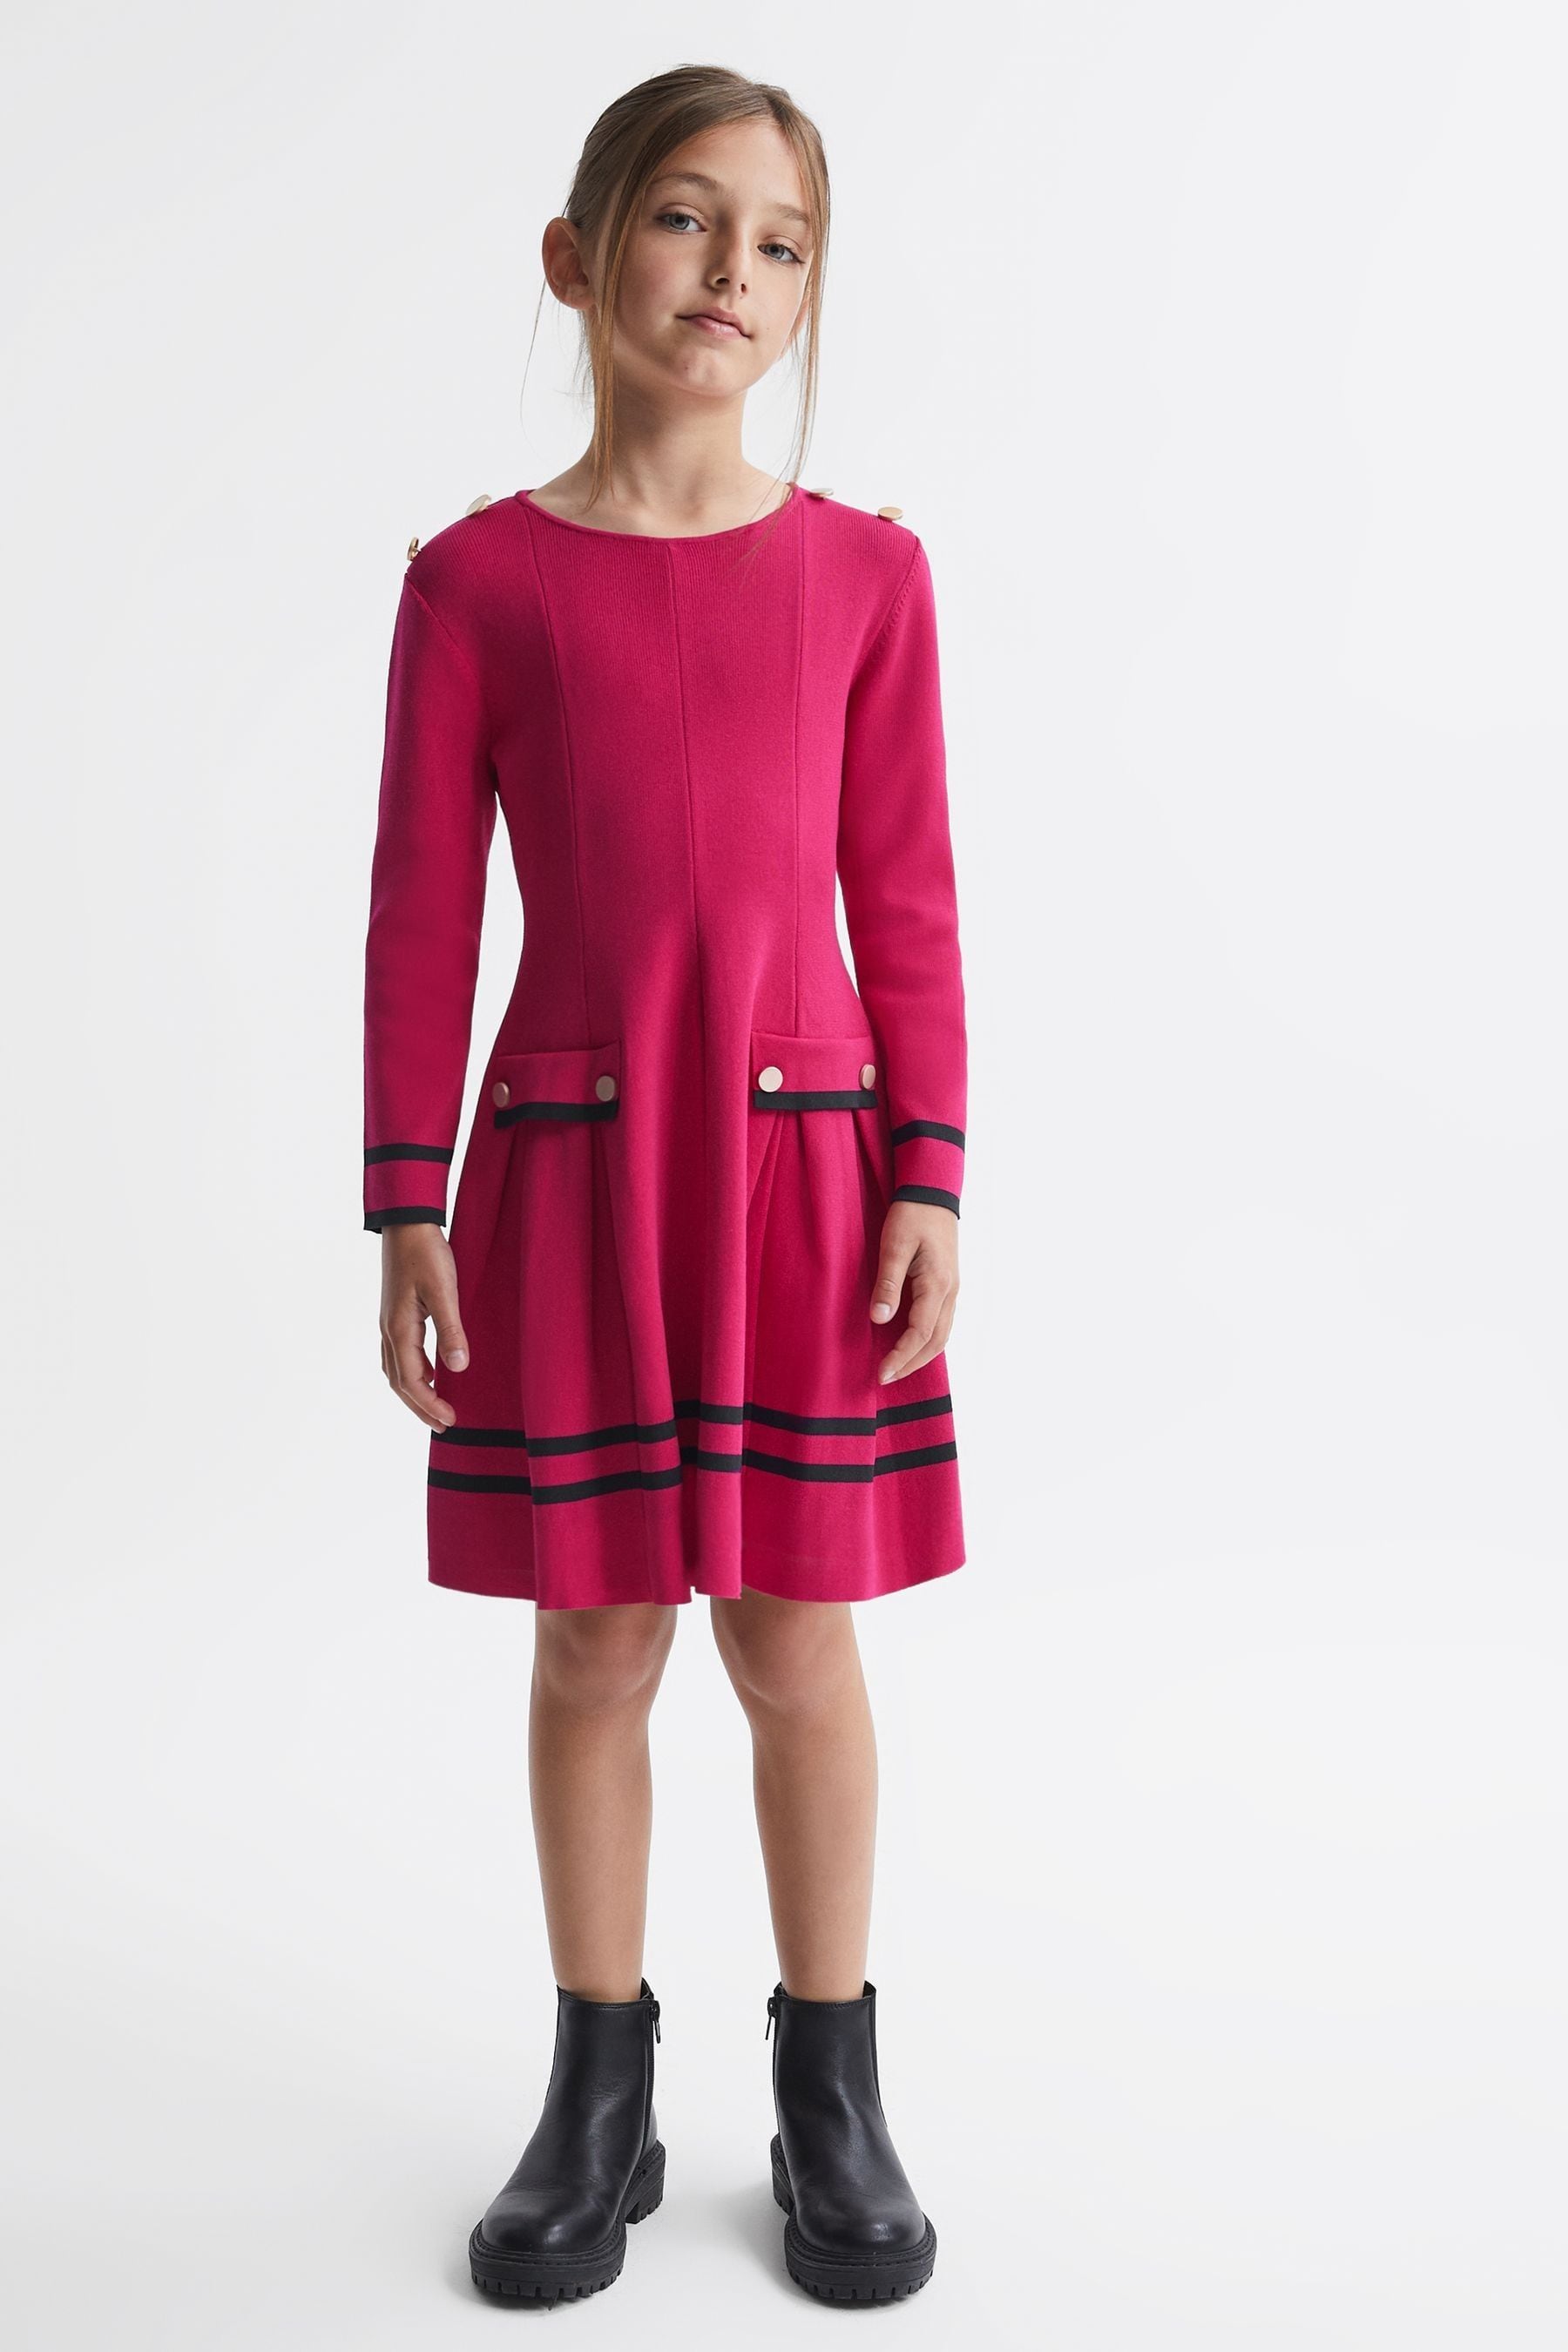 Paige Kids' Bright Pink  Junior Knitted Flared Dress